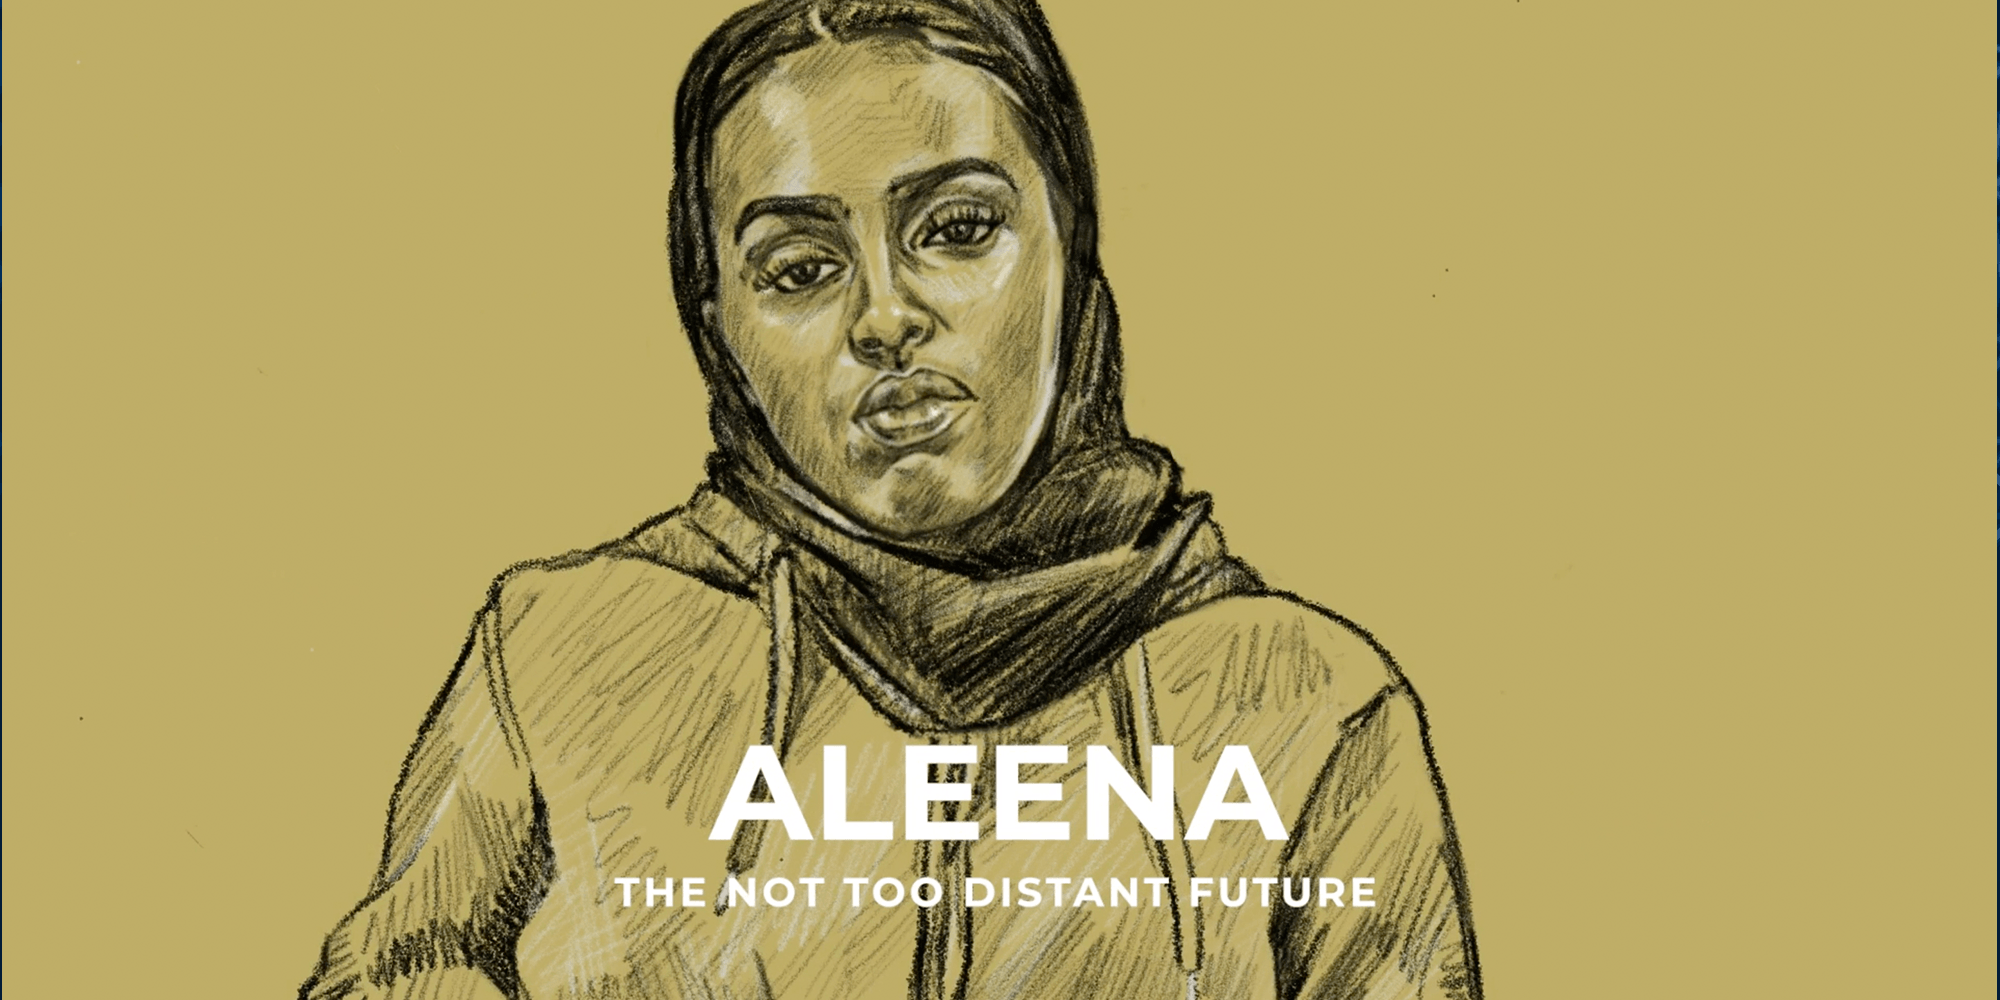 Pencil drawing of young female wearing a head scarf and hoody, text saying 